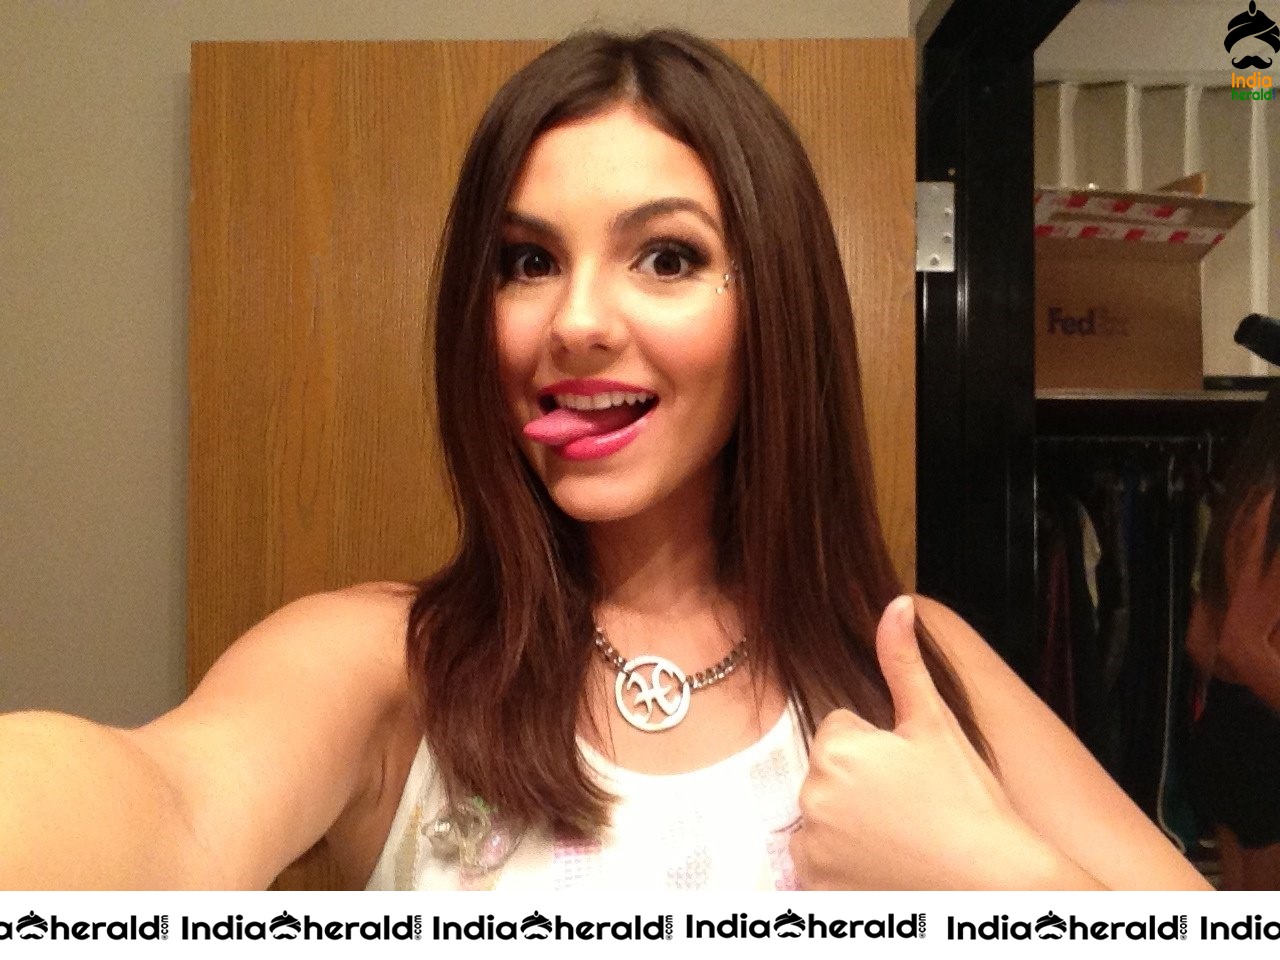 Victoria Justice LEAKED PRIVATE HOT TOPLESS EXPOSING PHOTOS Set 1